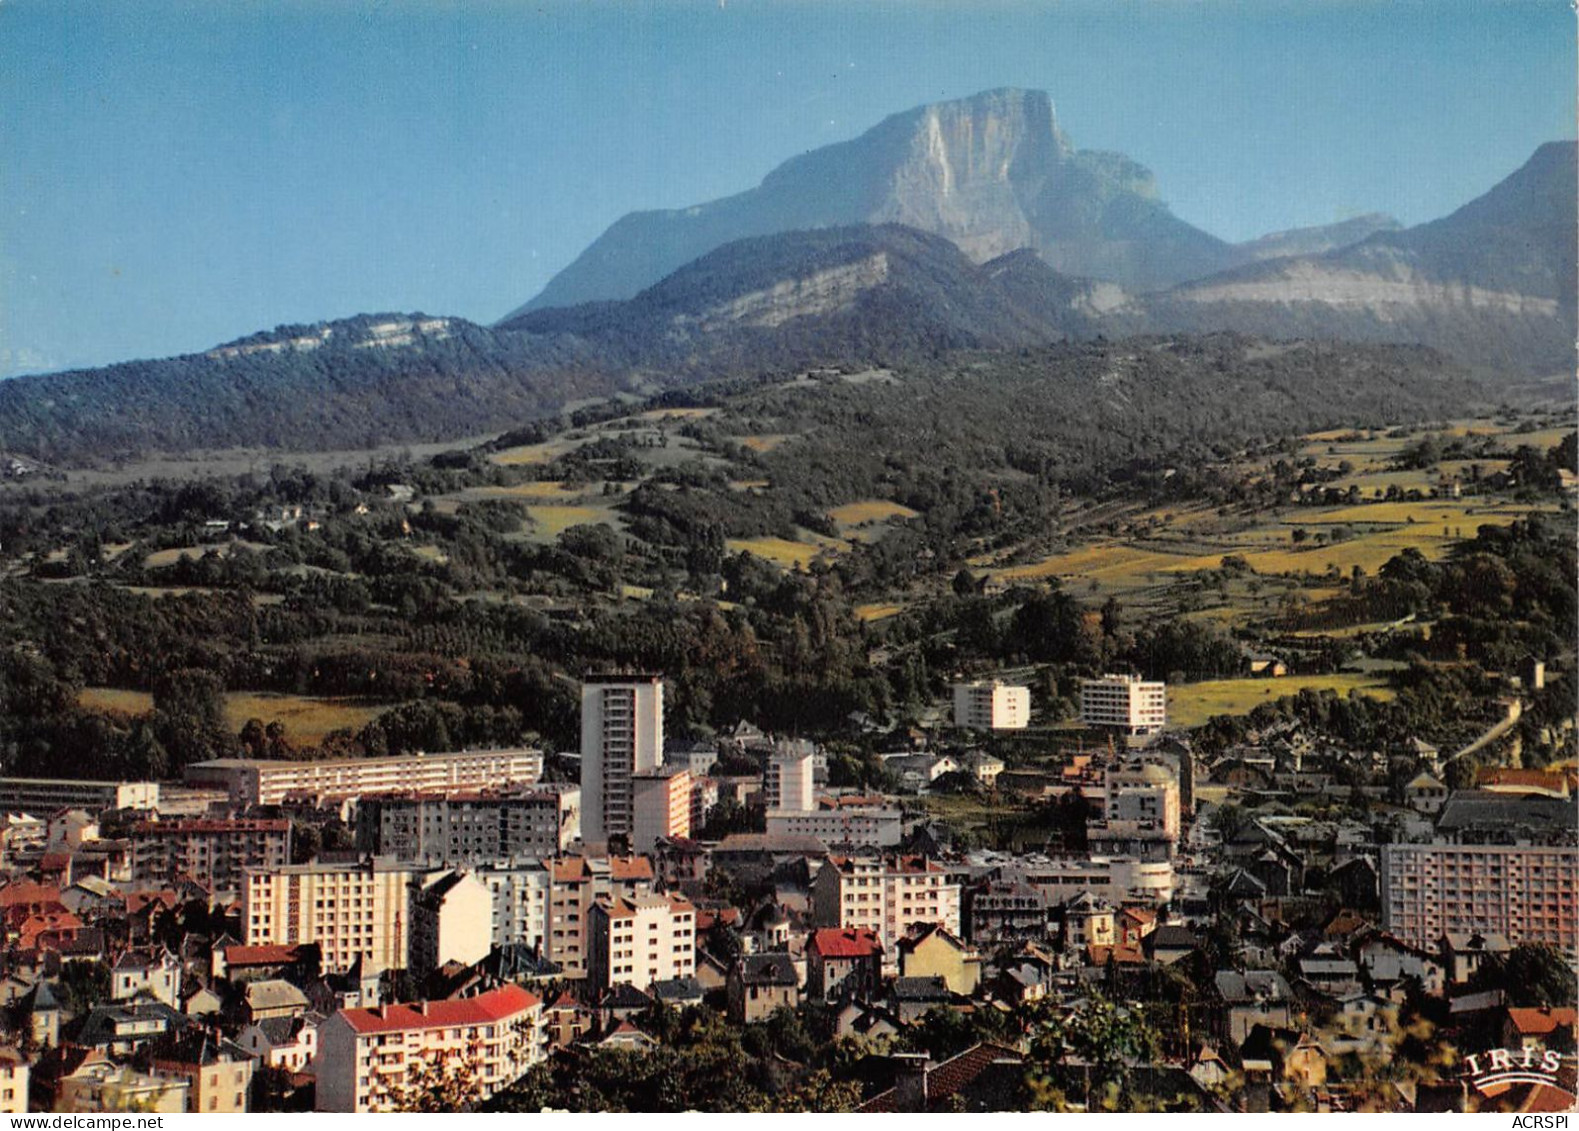 73 CHAMBERY Vue Générale Aérienne Panoramique (Scan R/V) N° 32 \MS9038 - Chambery